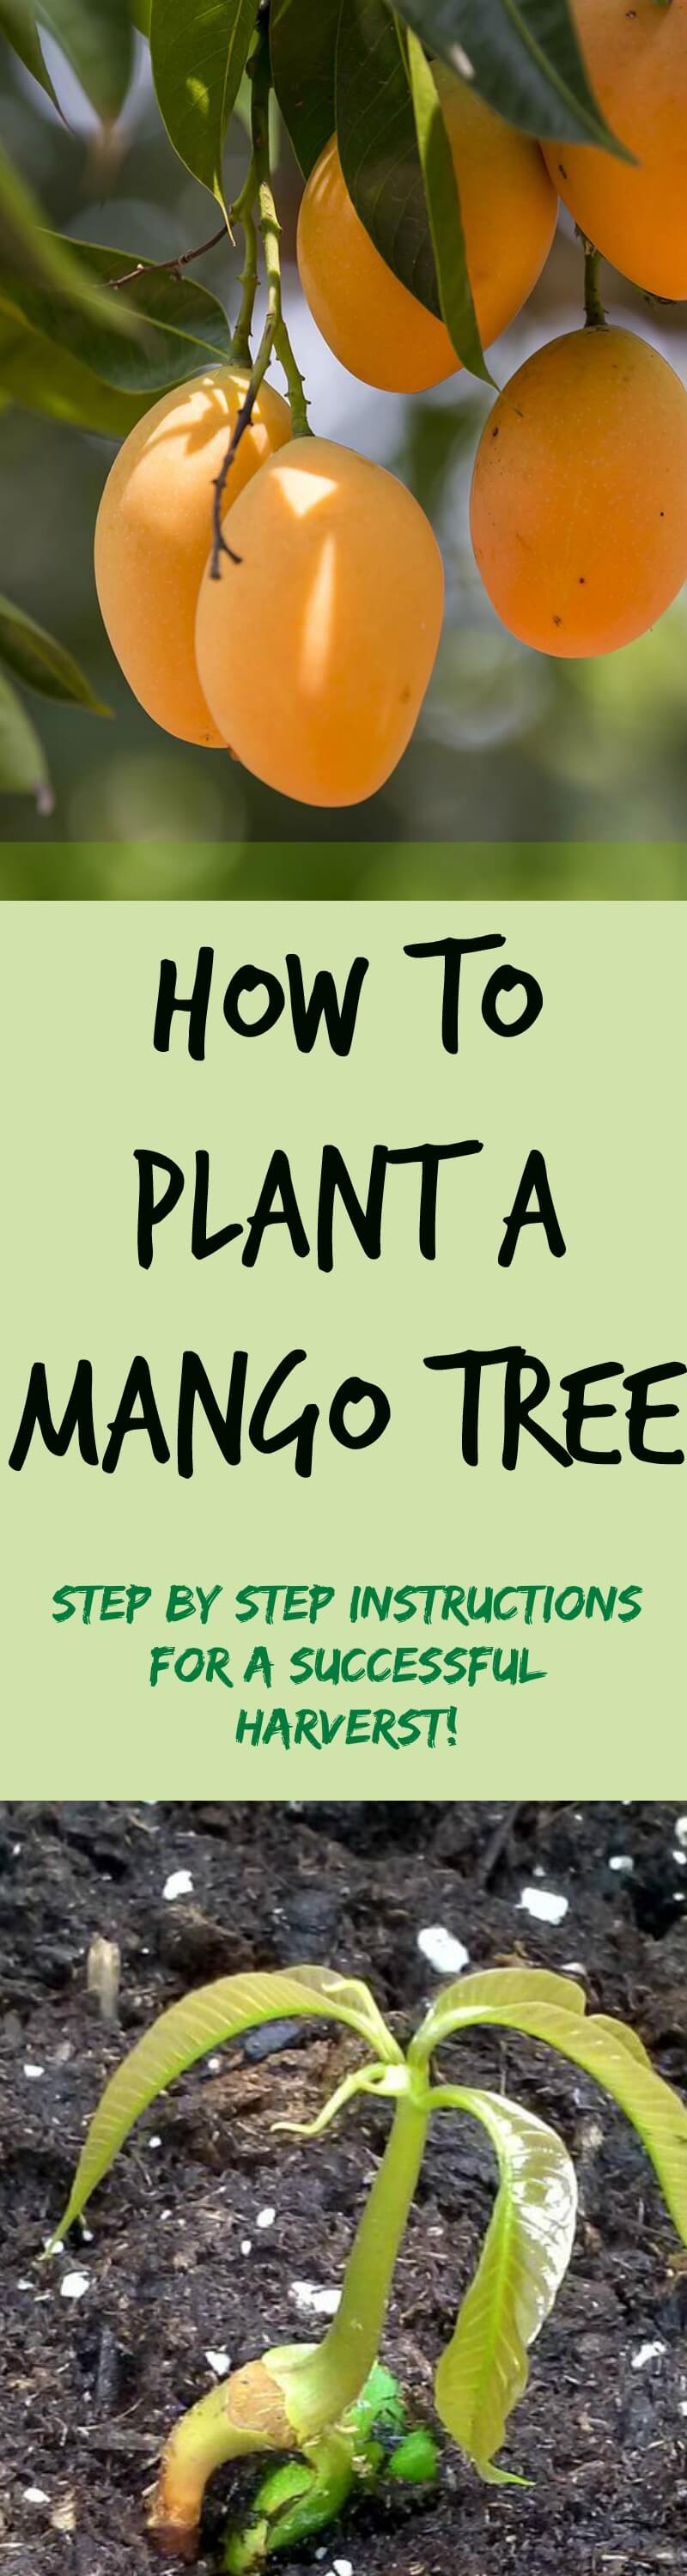 how to plant a mango seed